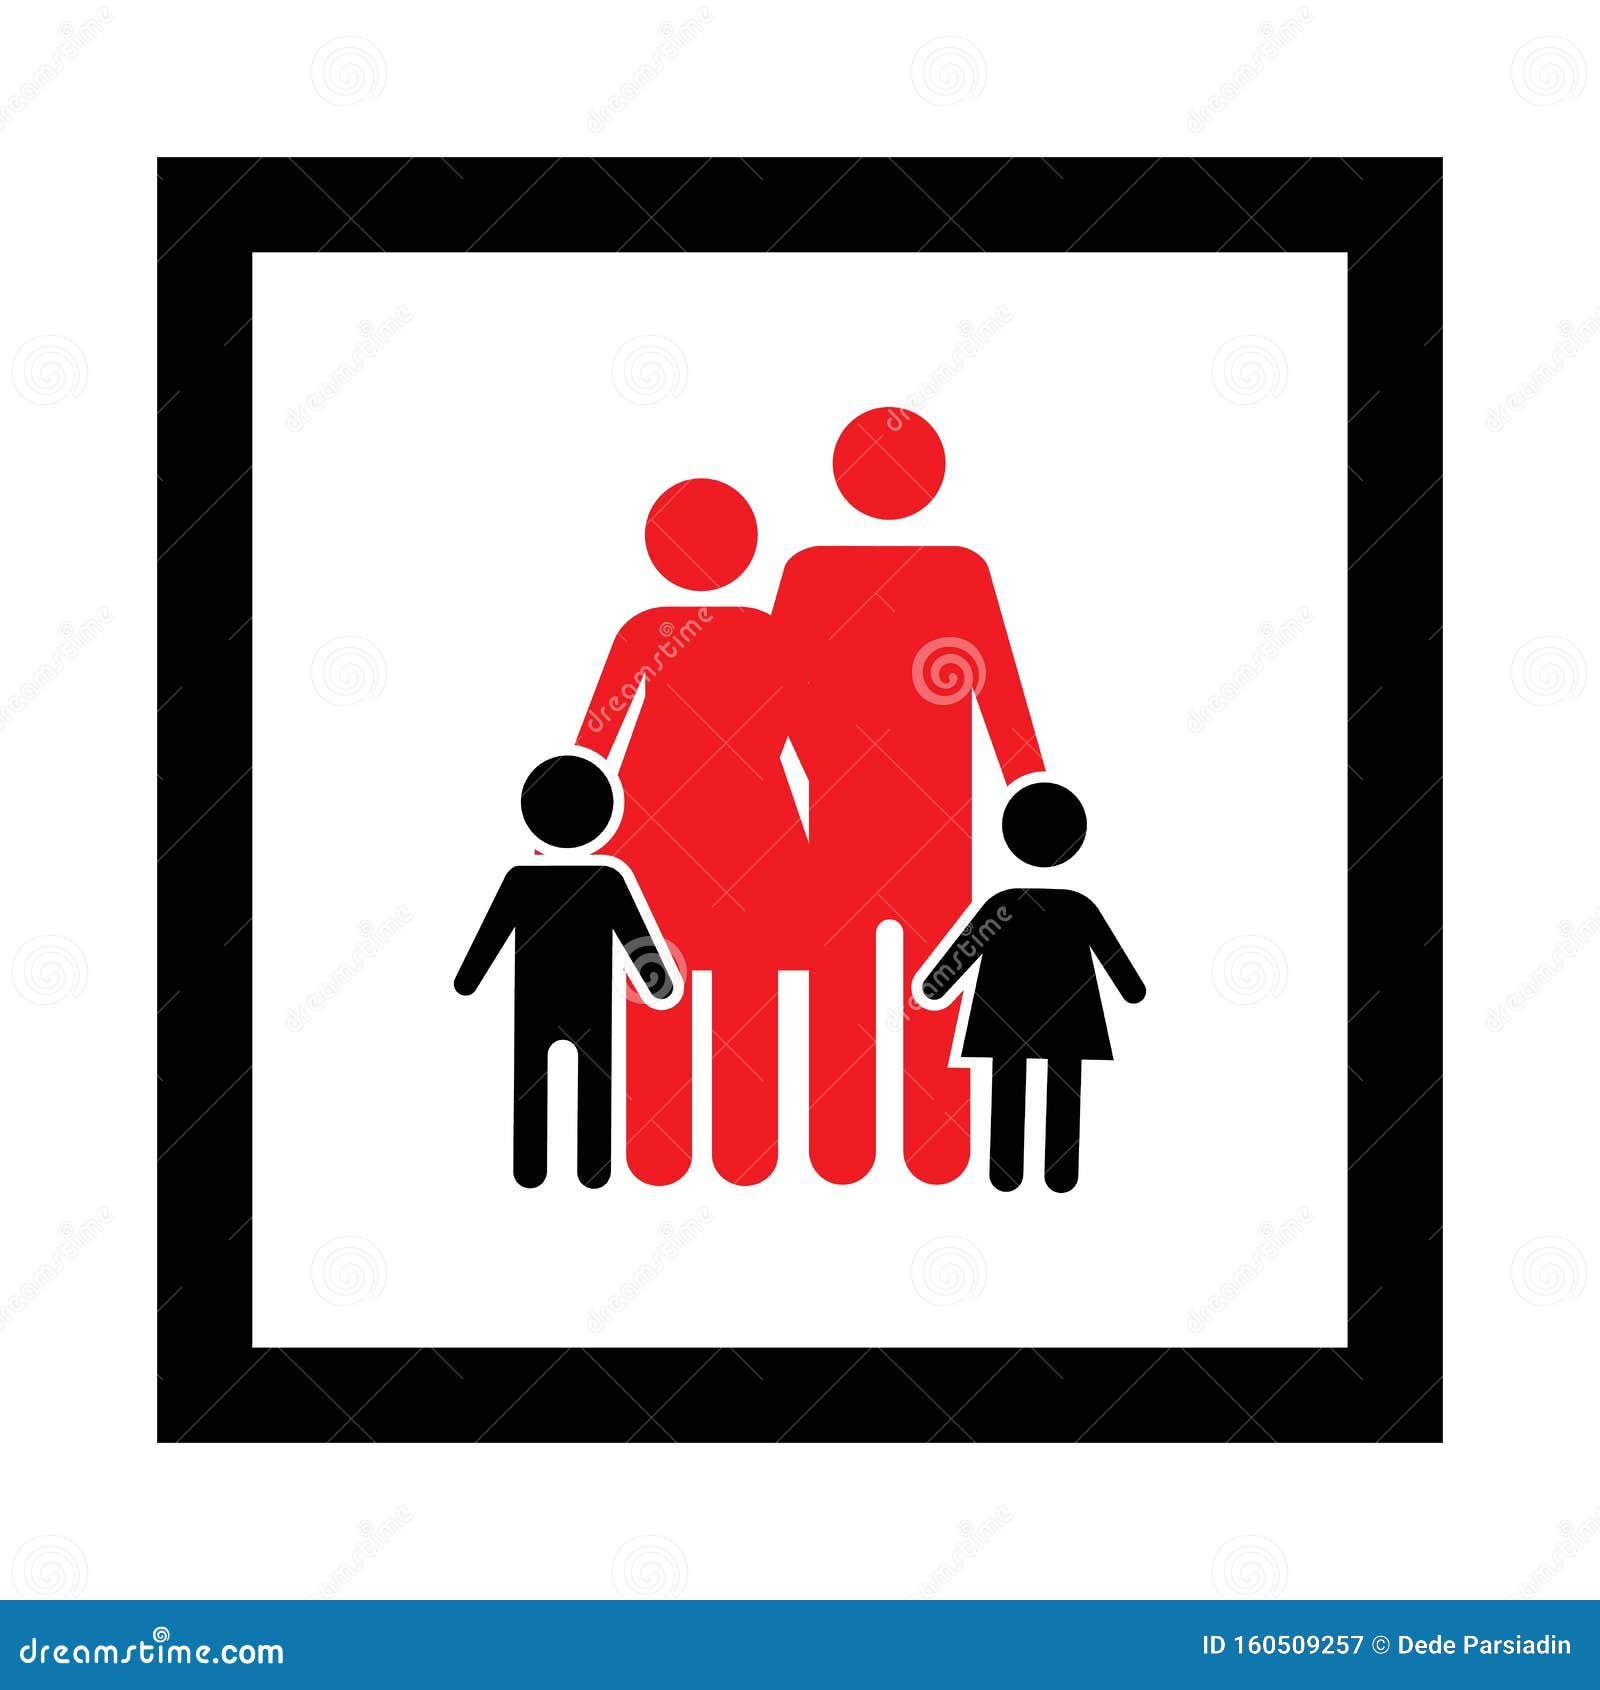 Family stock vector. Illustration of parenting, isolated ...